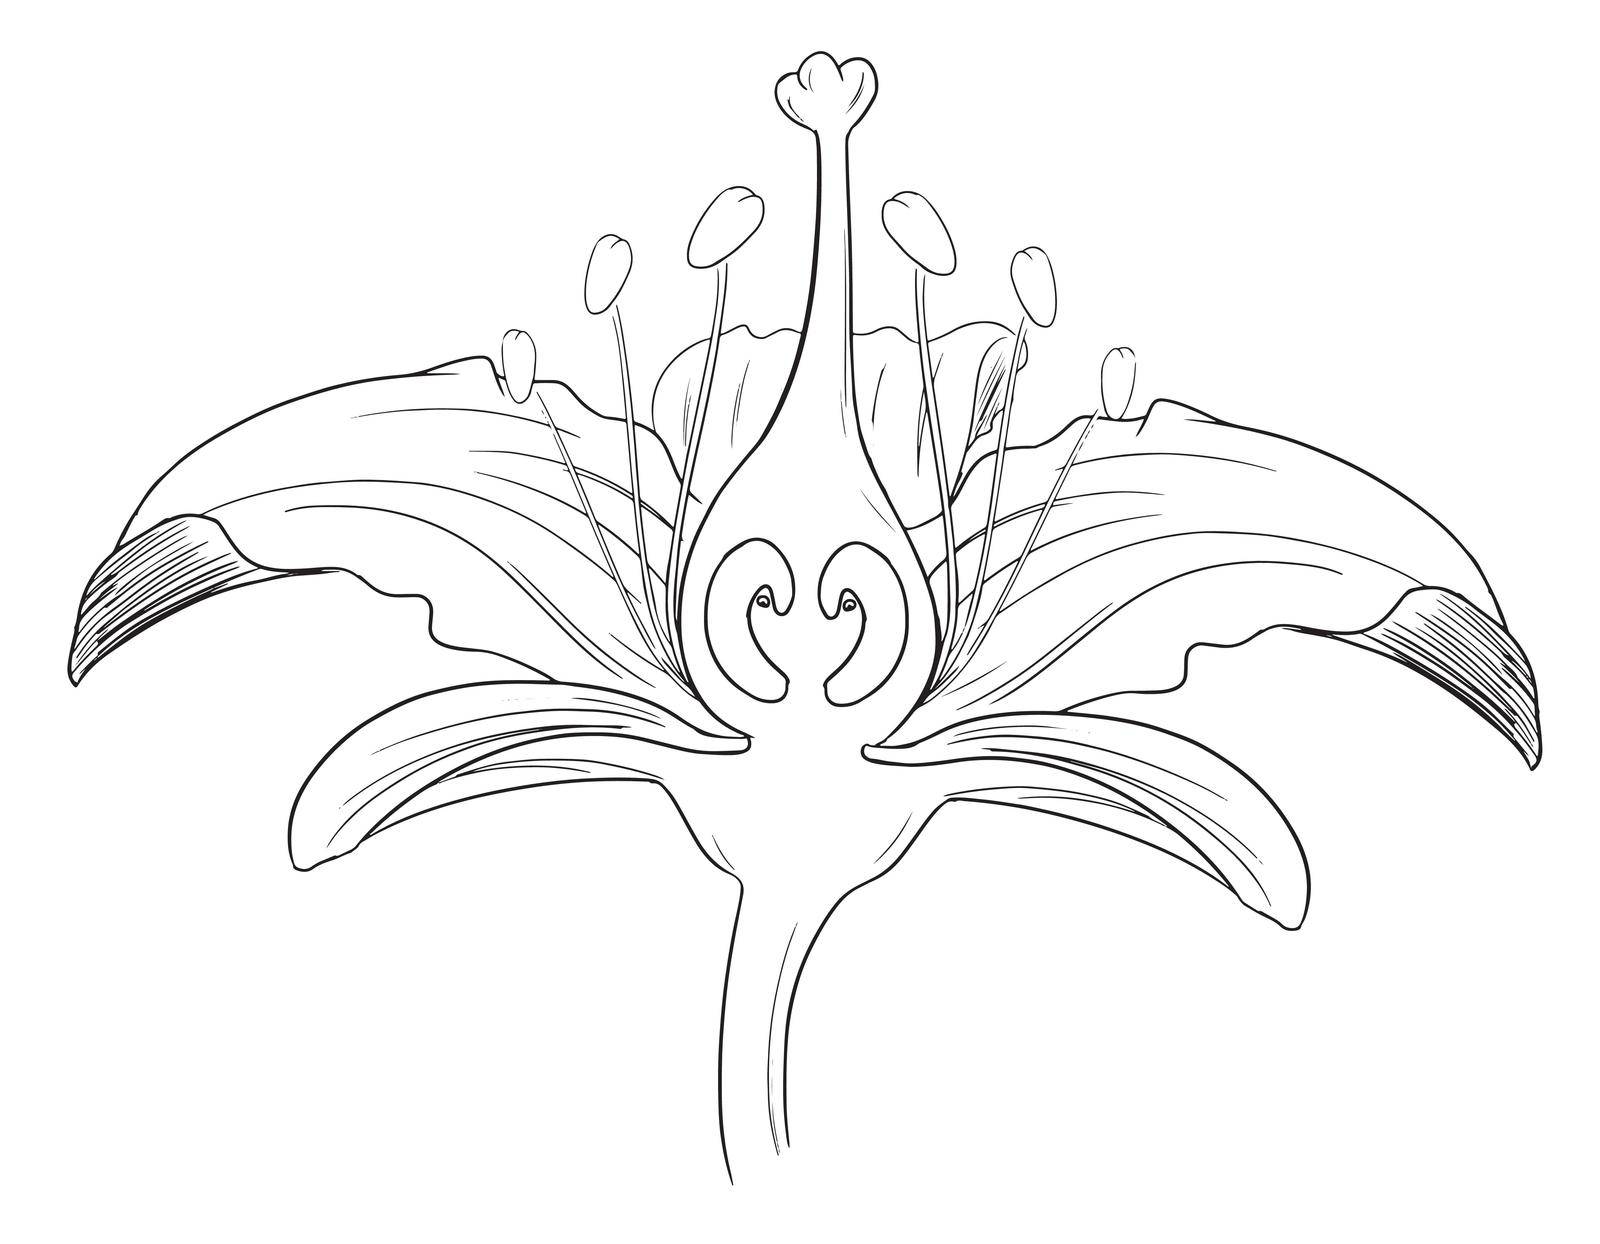 Tiger lily flower outline by iimages